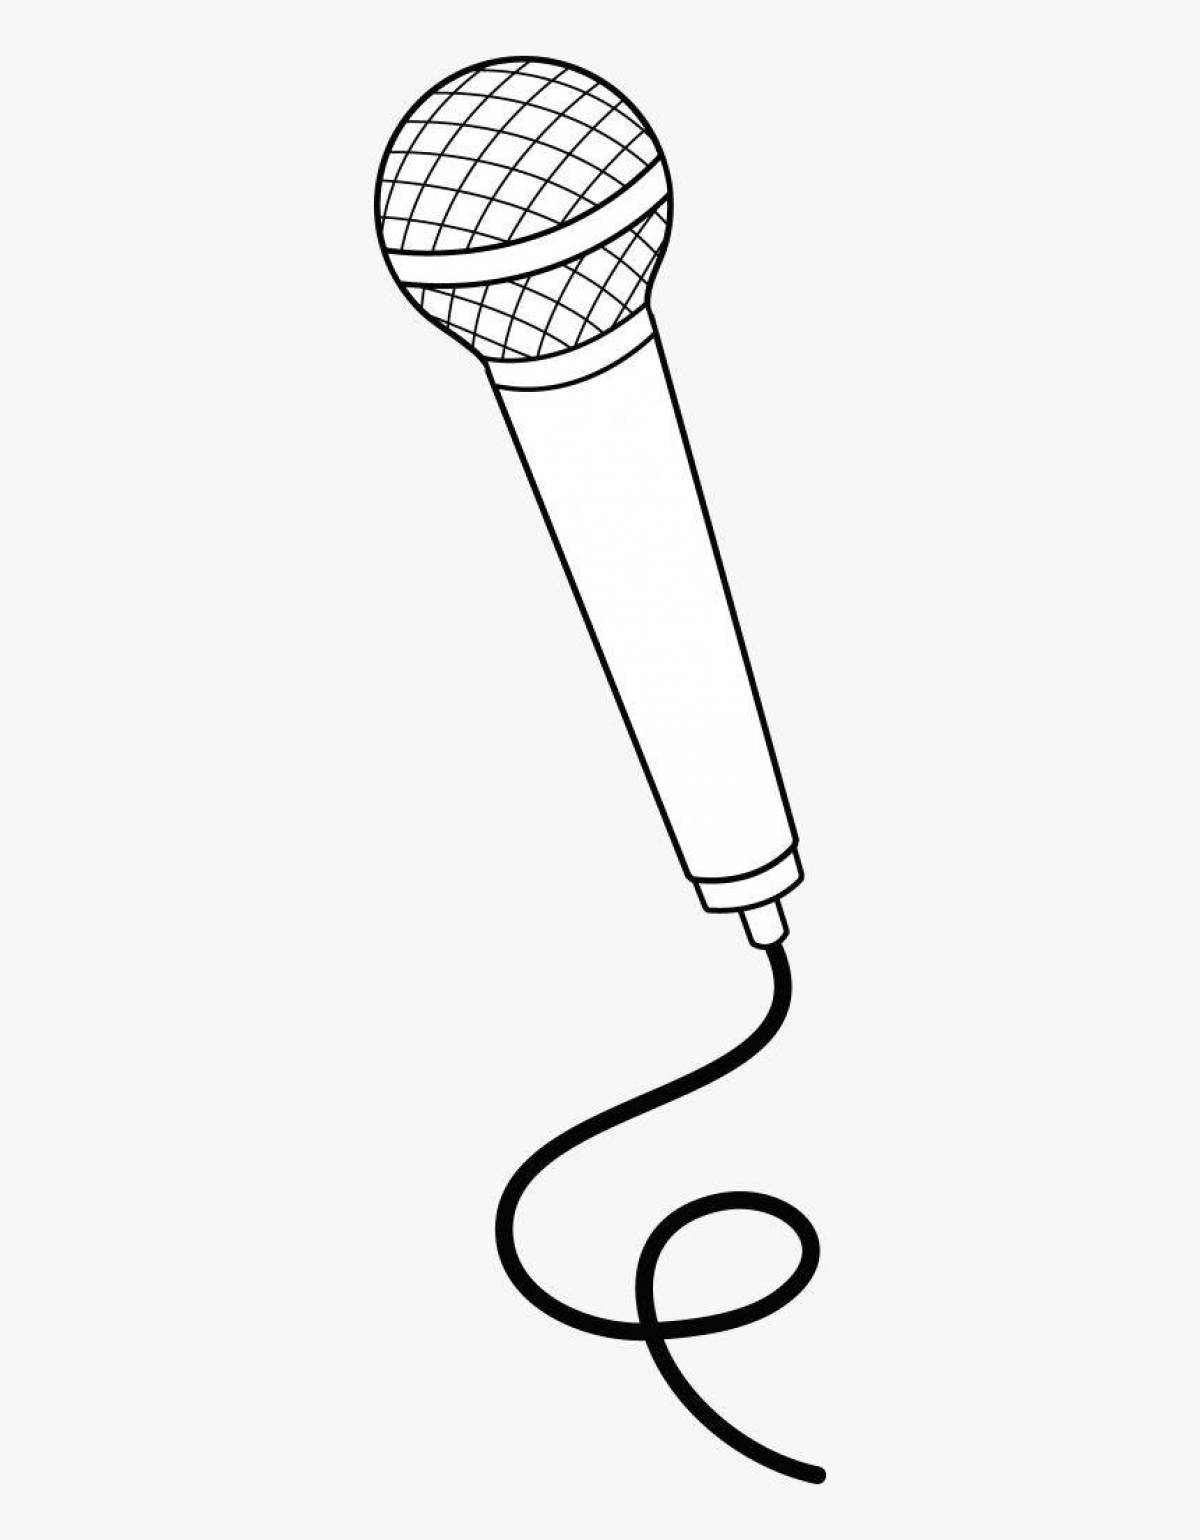 Coloring book cheerful microphone for children